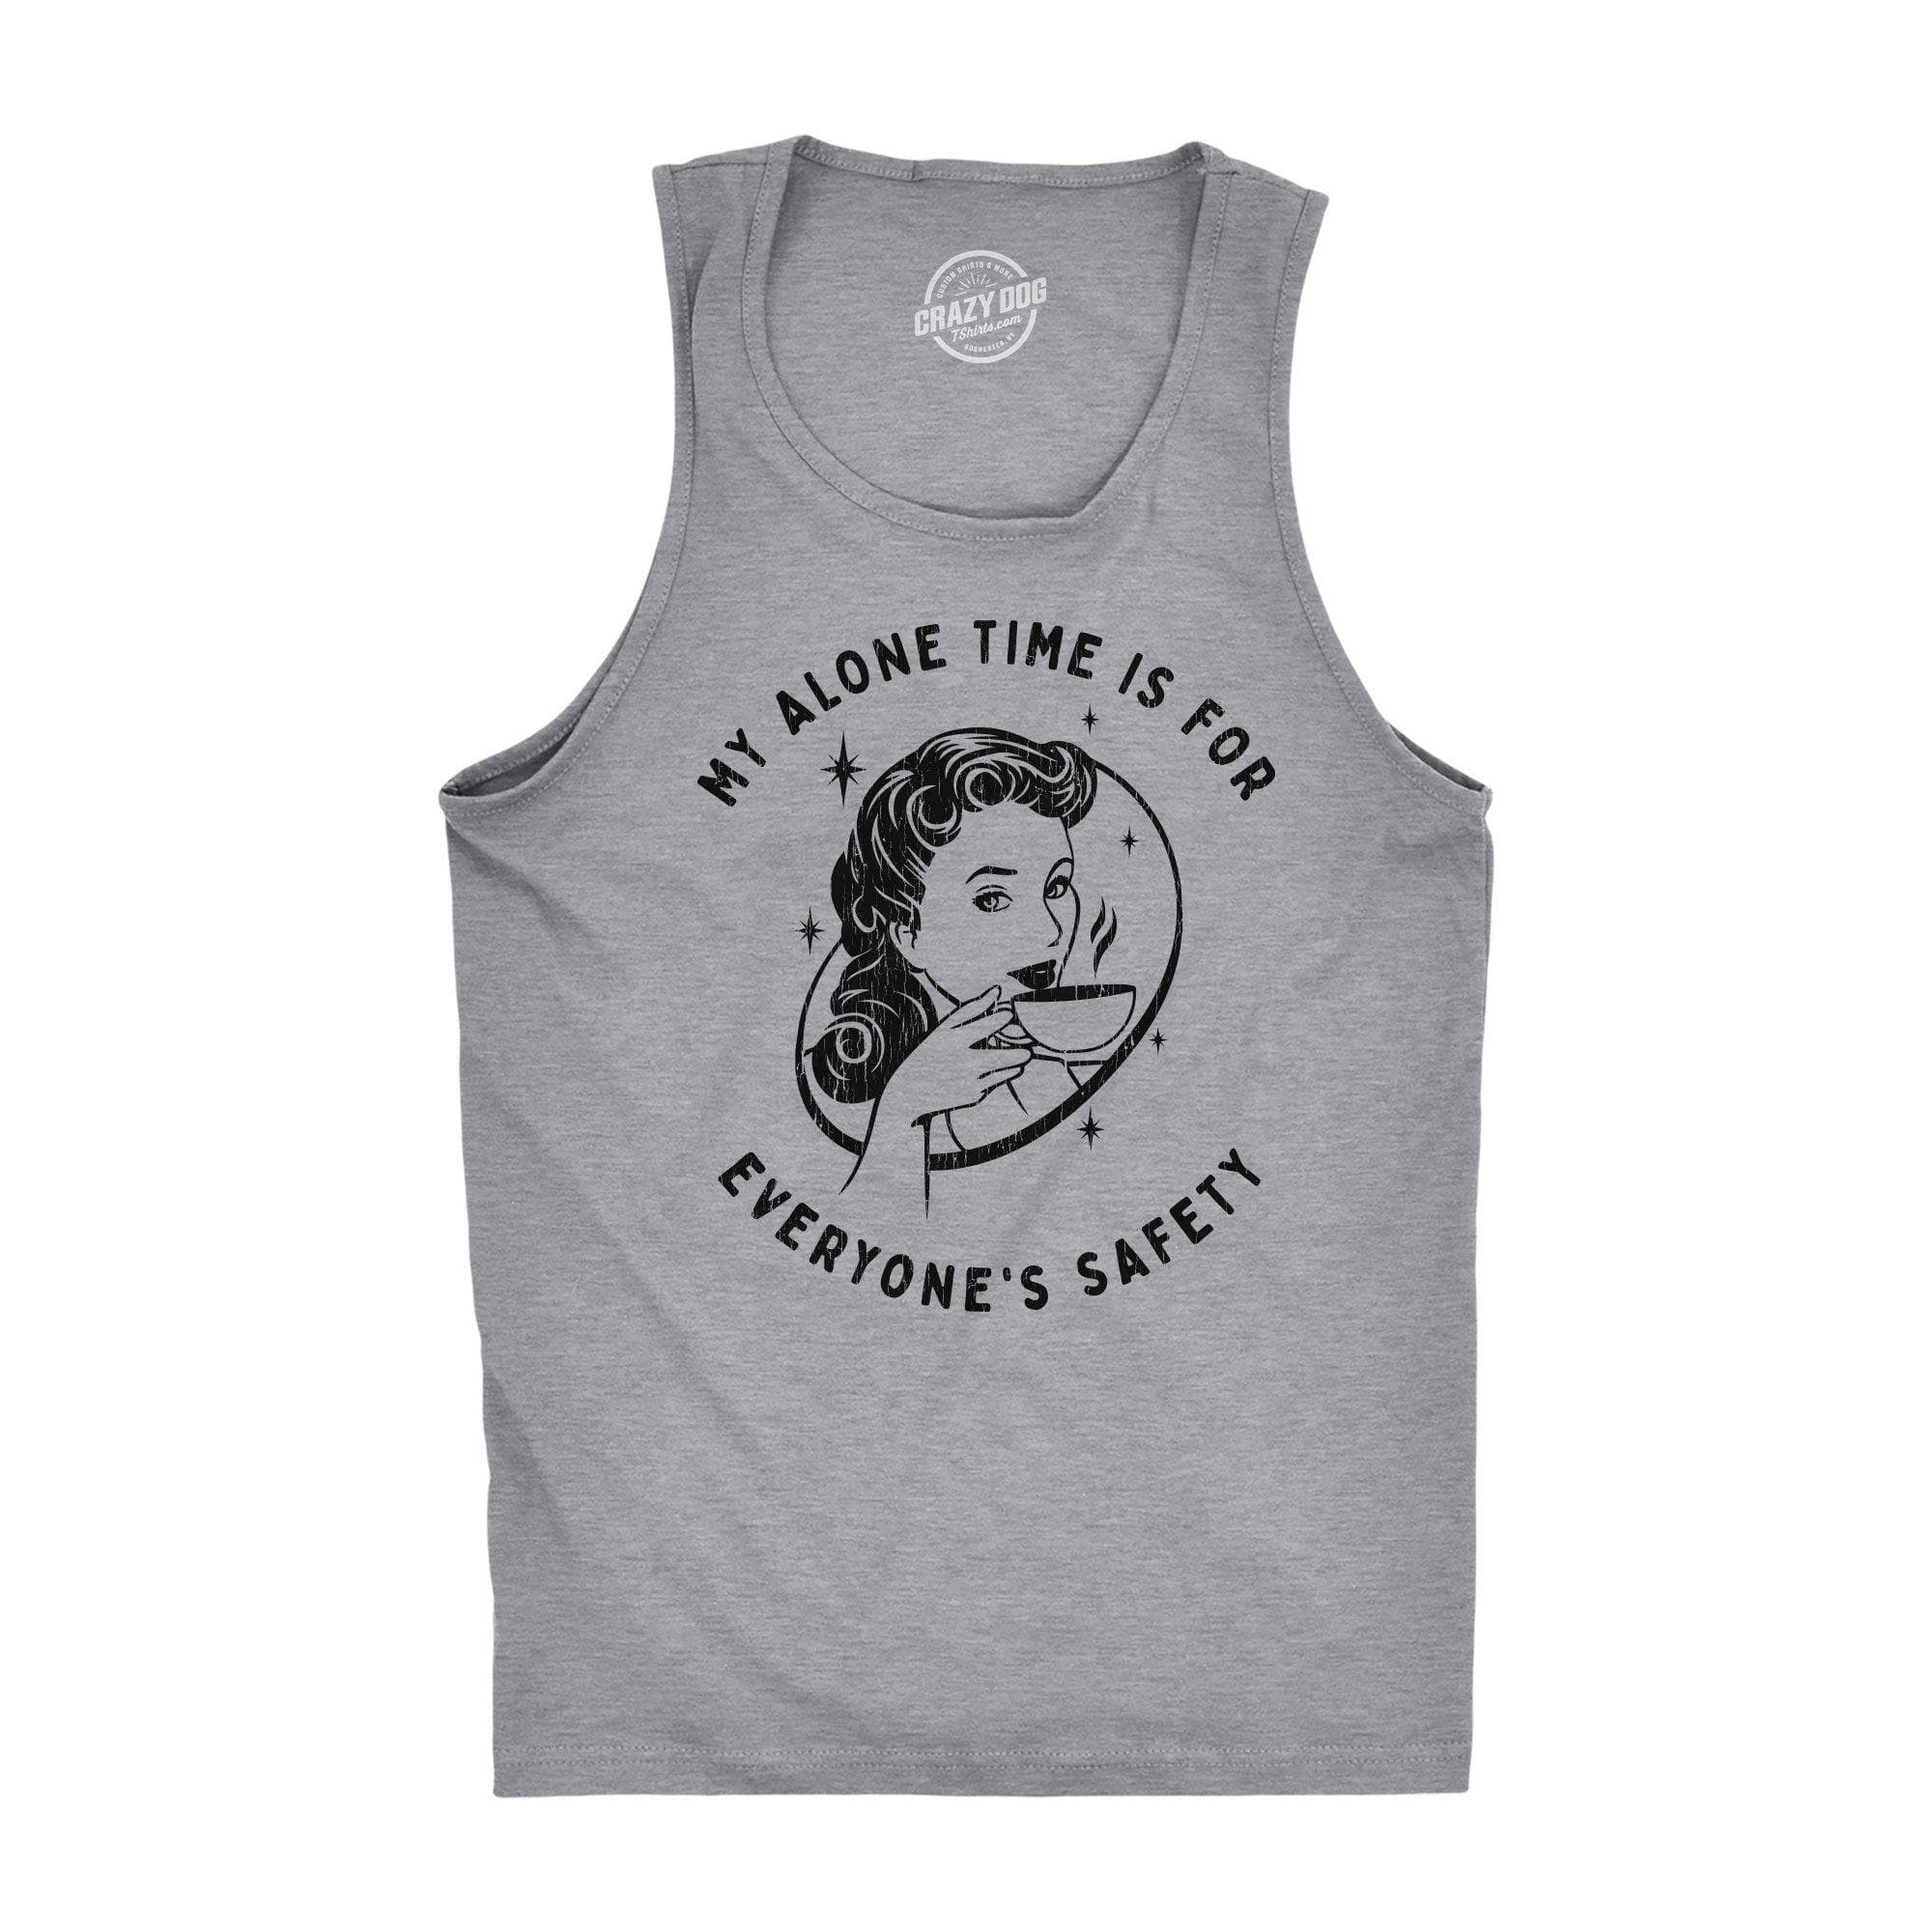 My Alone Time Is For Everyones Safety Men's Tank Top - Crazy Dog T-Shirts